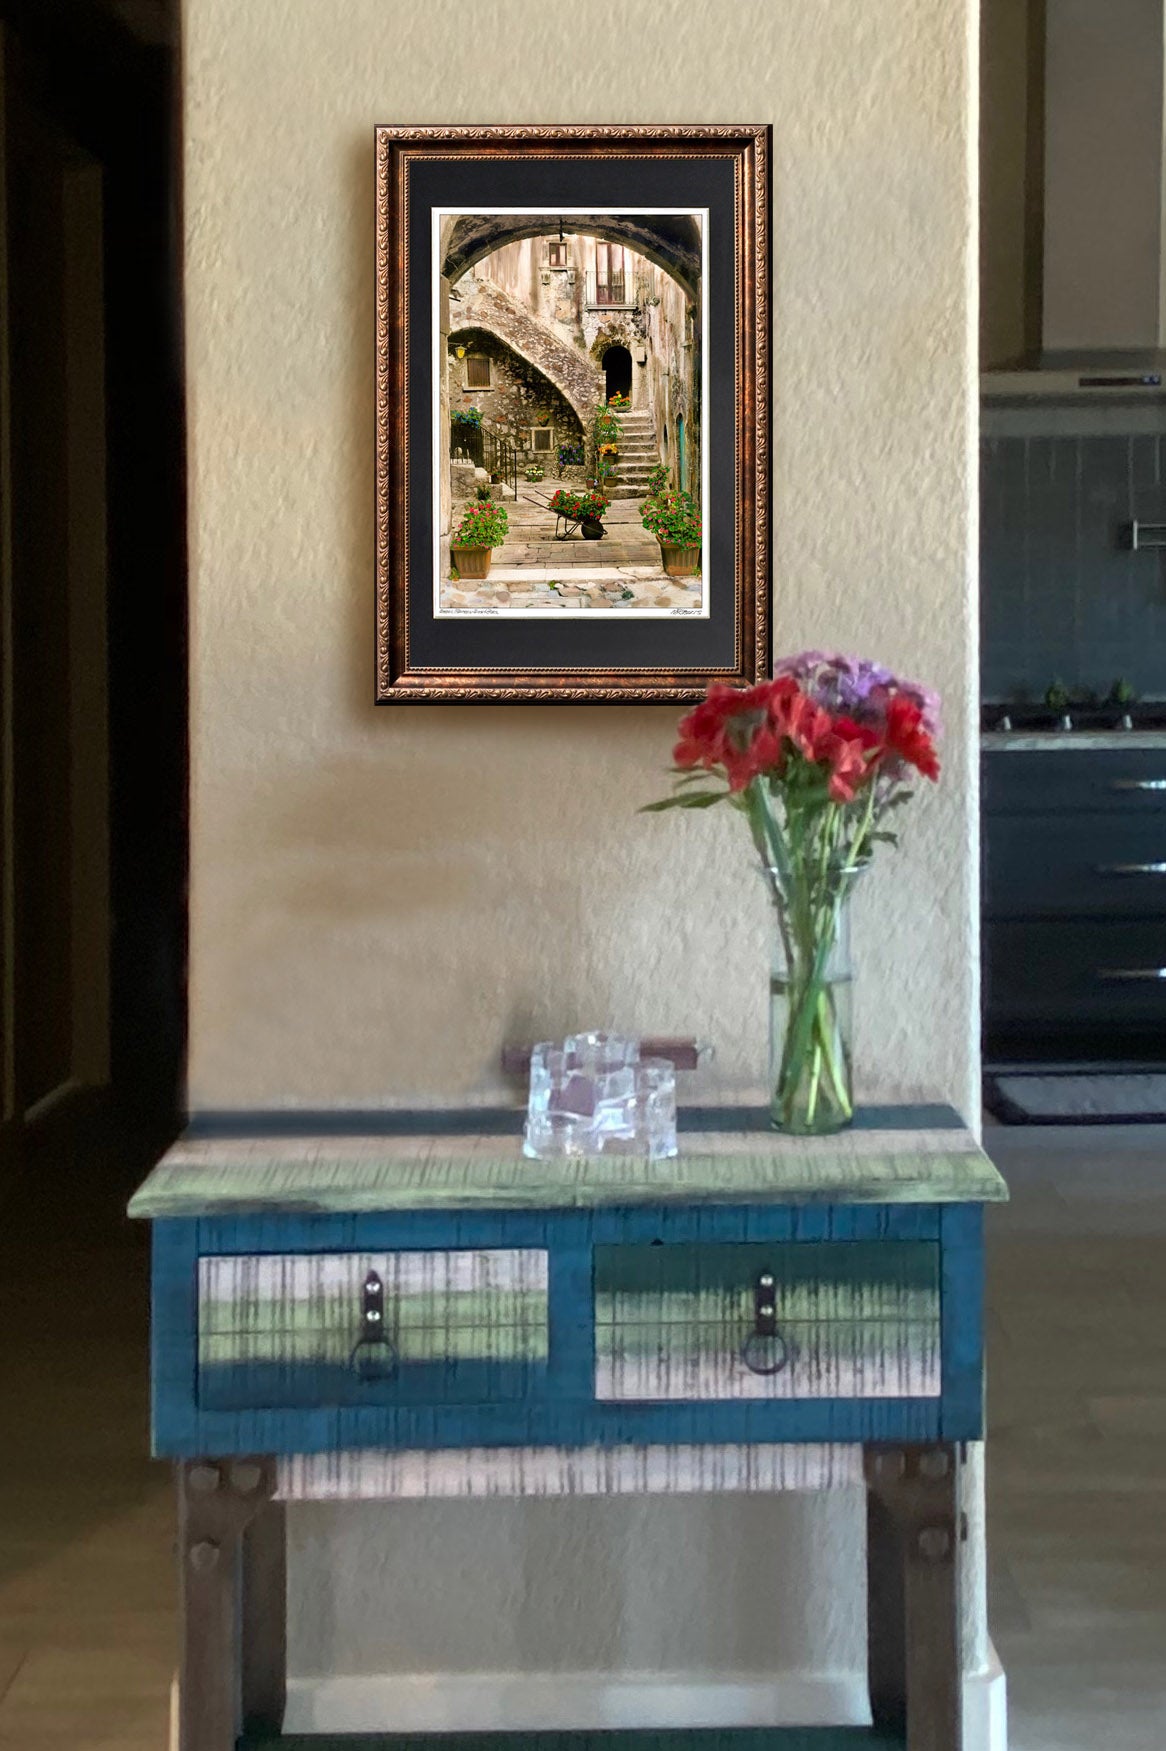 "Wheelbarrow of Roses" Signed Matted & Framed